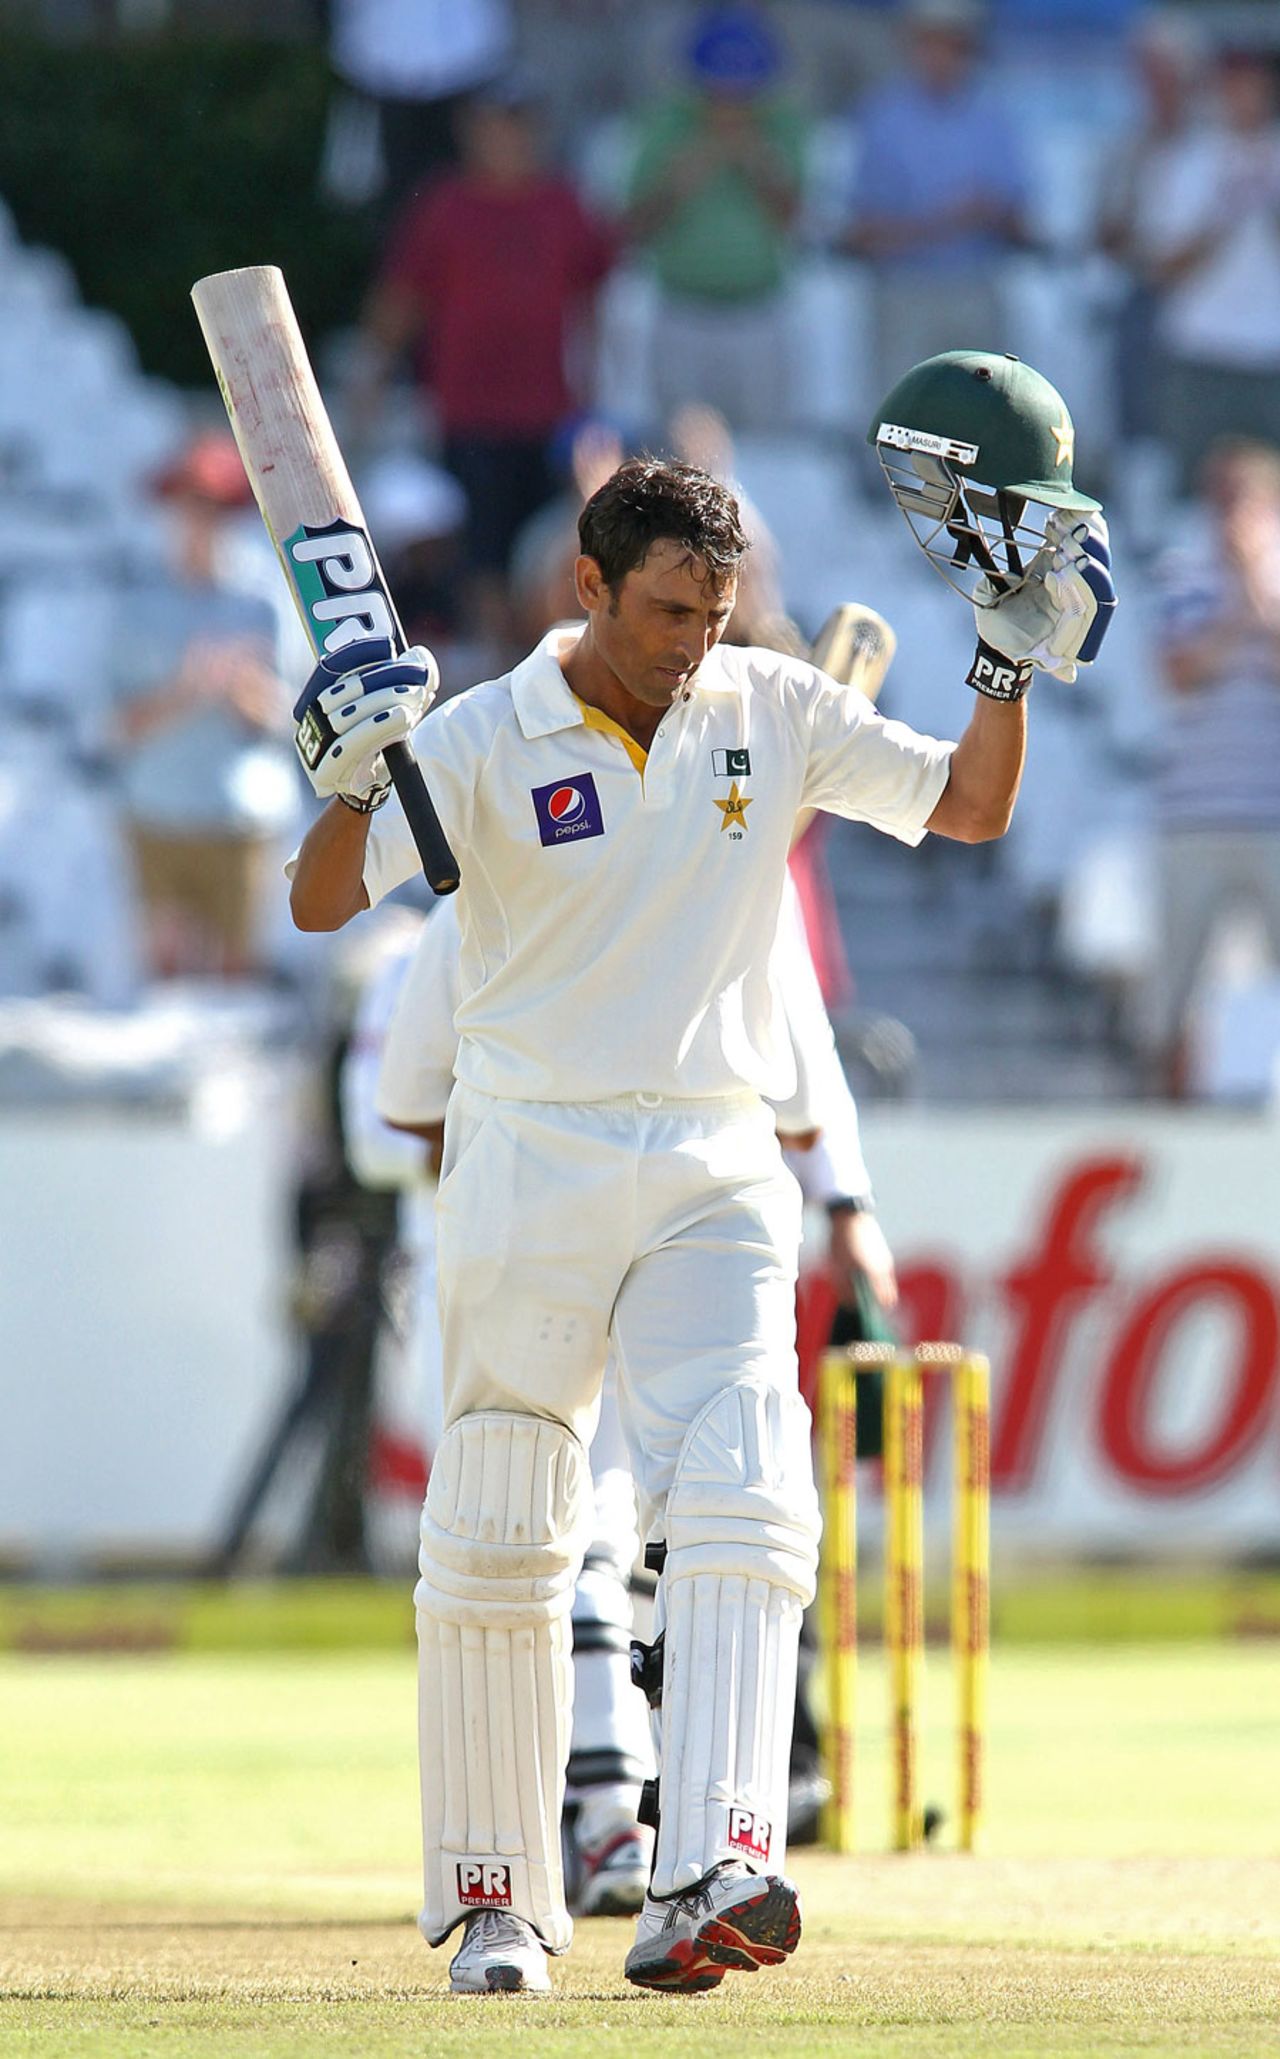 Younis Khan acknowledges the cheers on getting to a hundred, South Africa v Pakistan, 2nd Test, Cape Town, 1st day, February 14, 2013